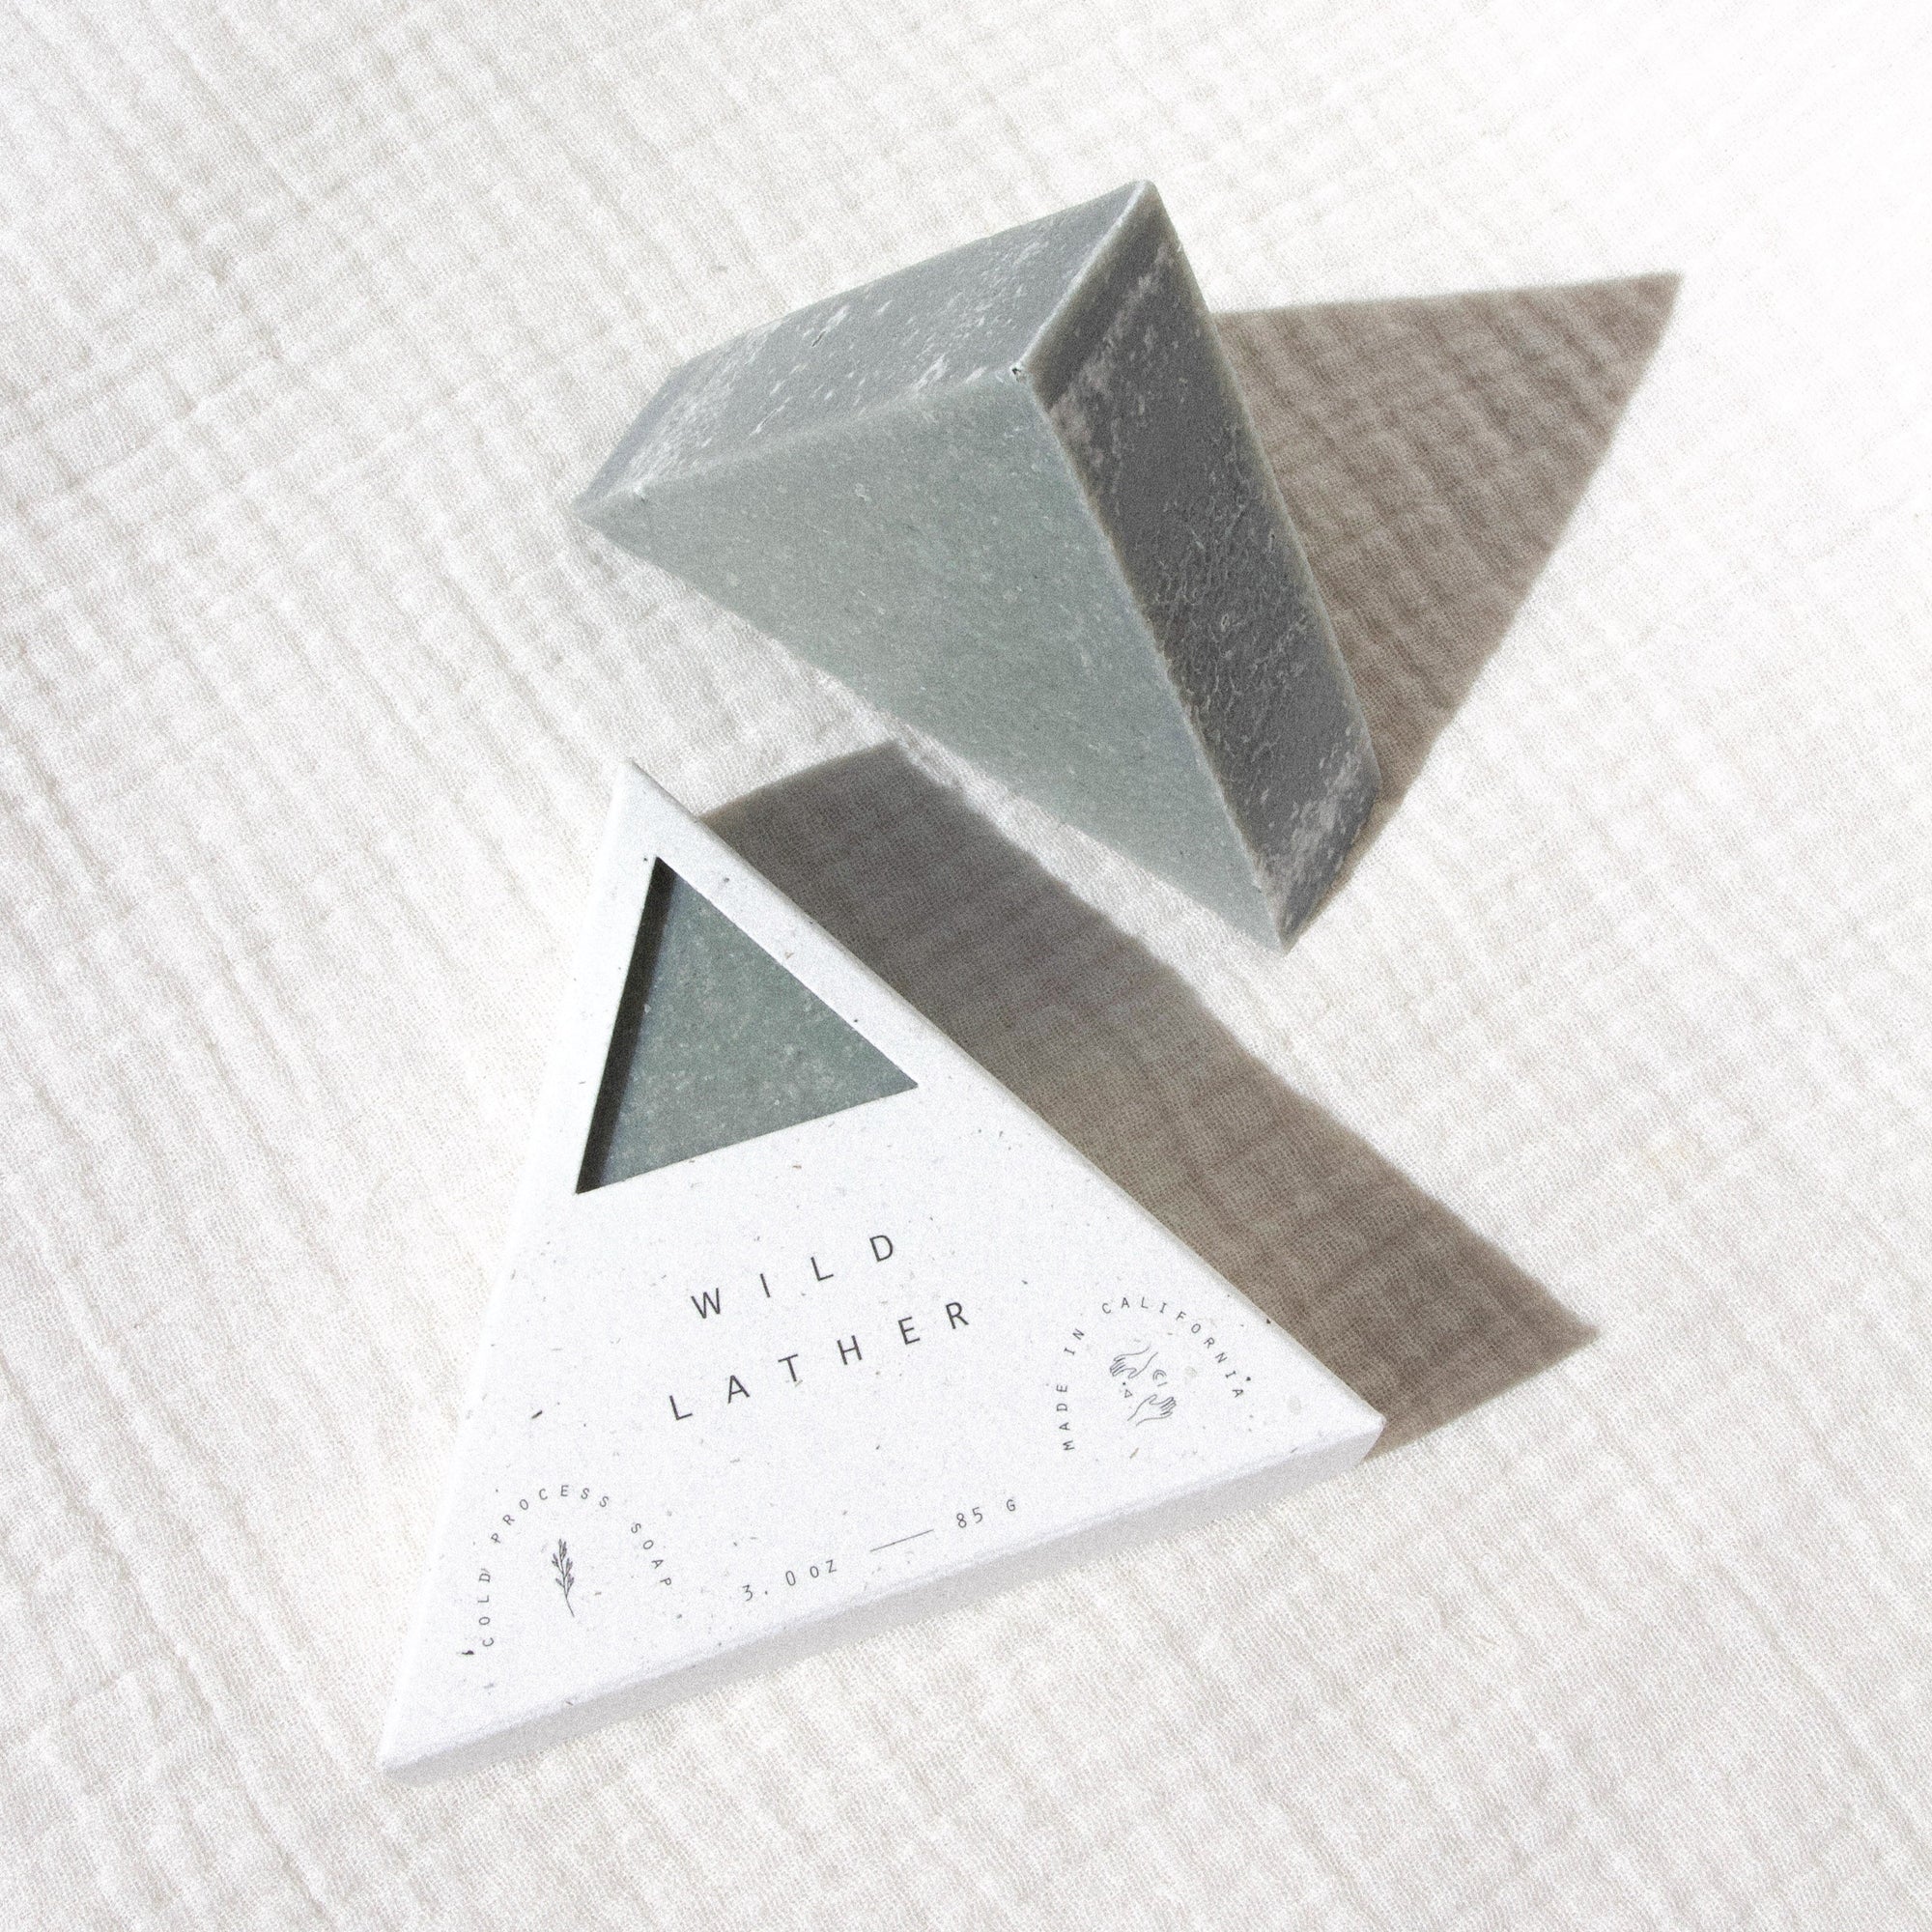 Two triangle soaps against textured linen